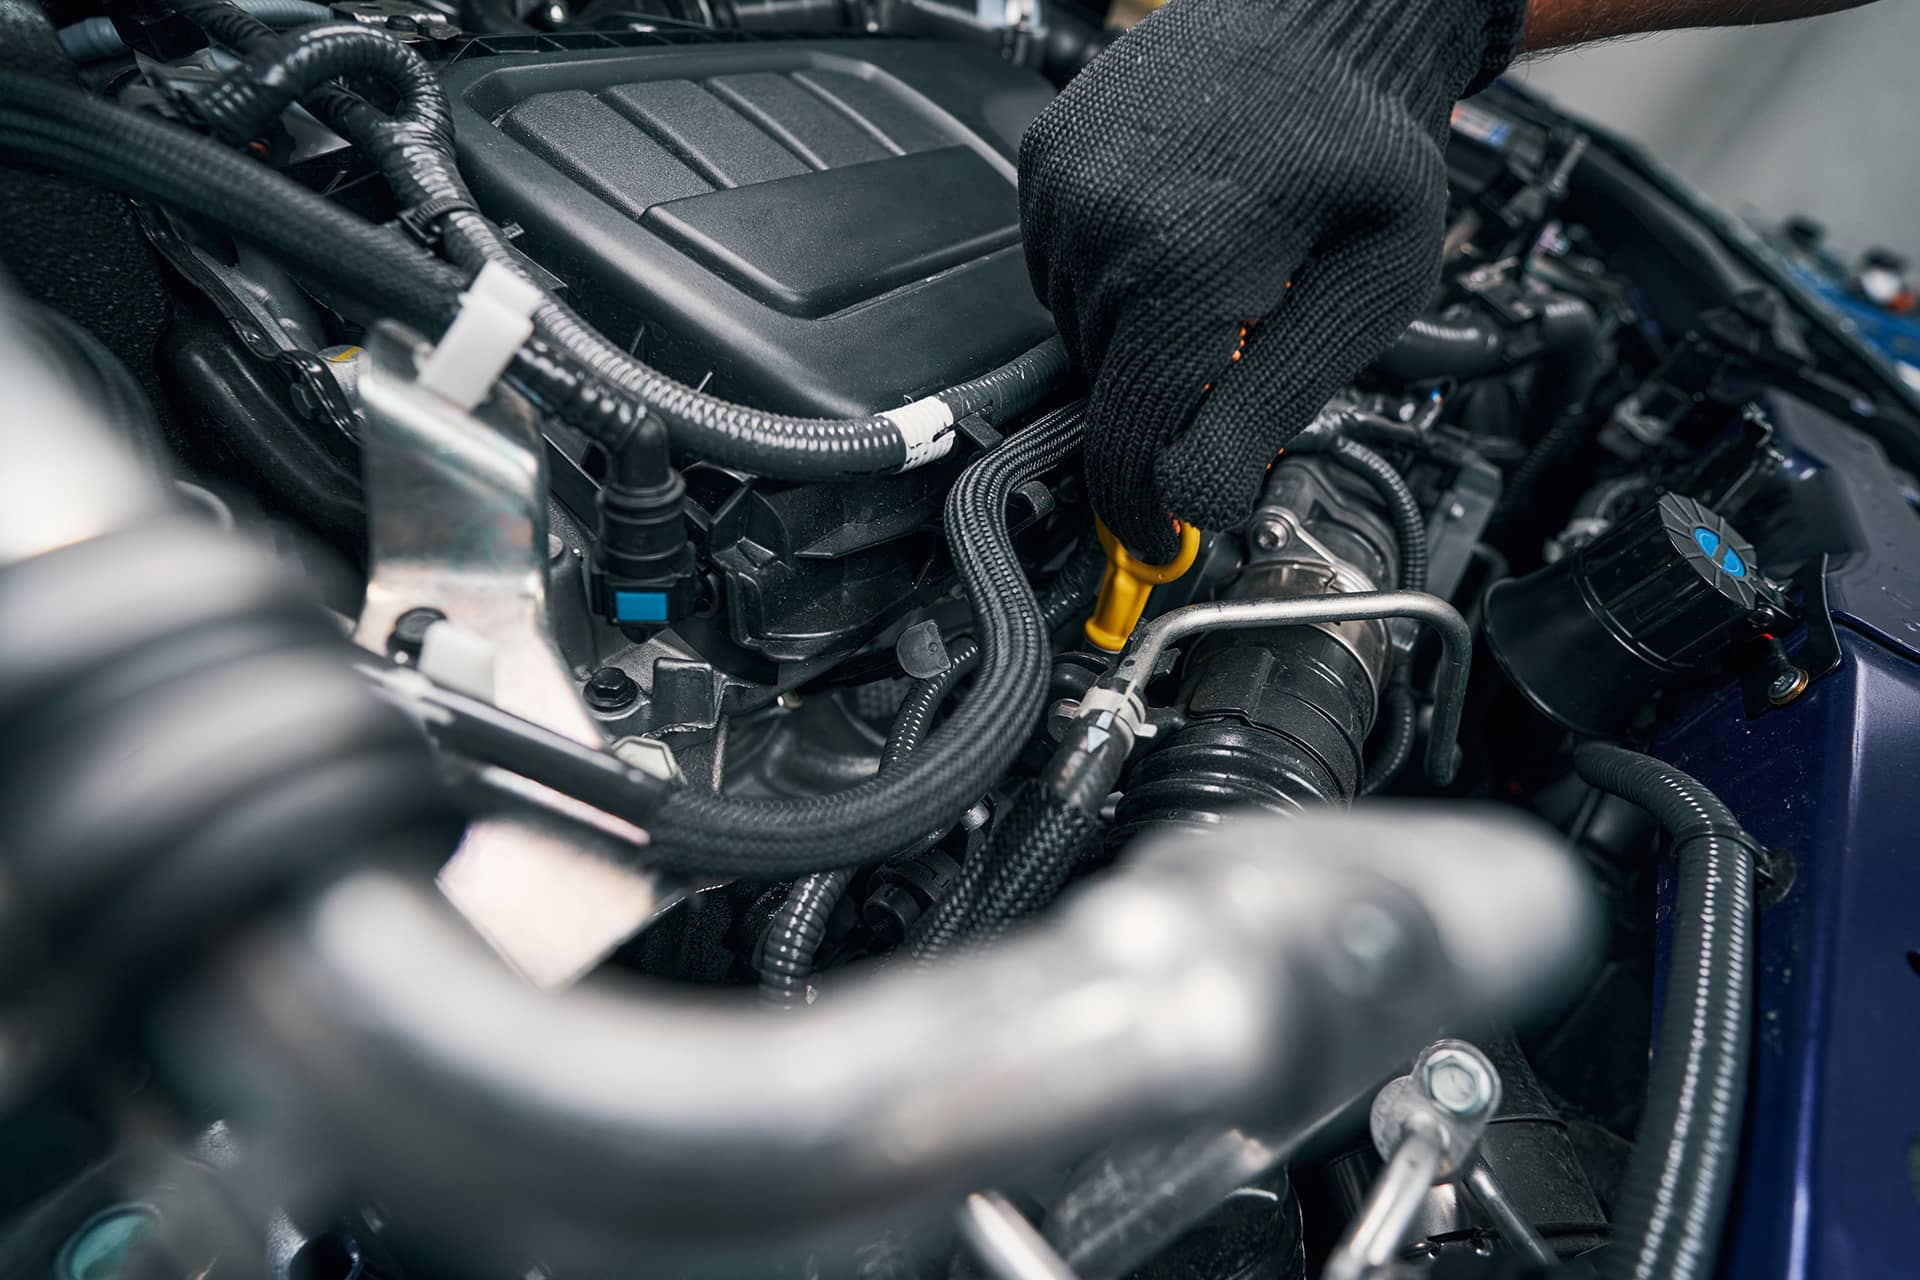 Engine Replacement Services in Morrow GA: Revitalize Your Vehicle’s Performance